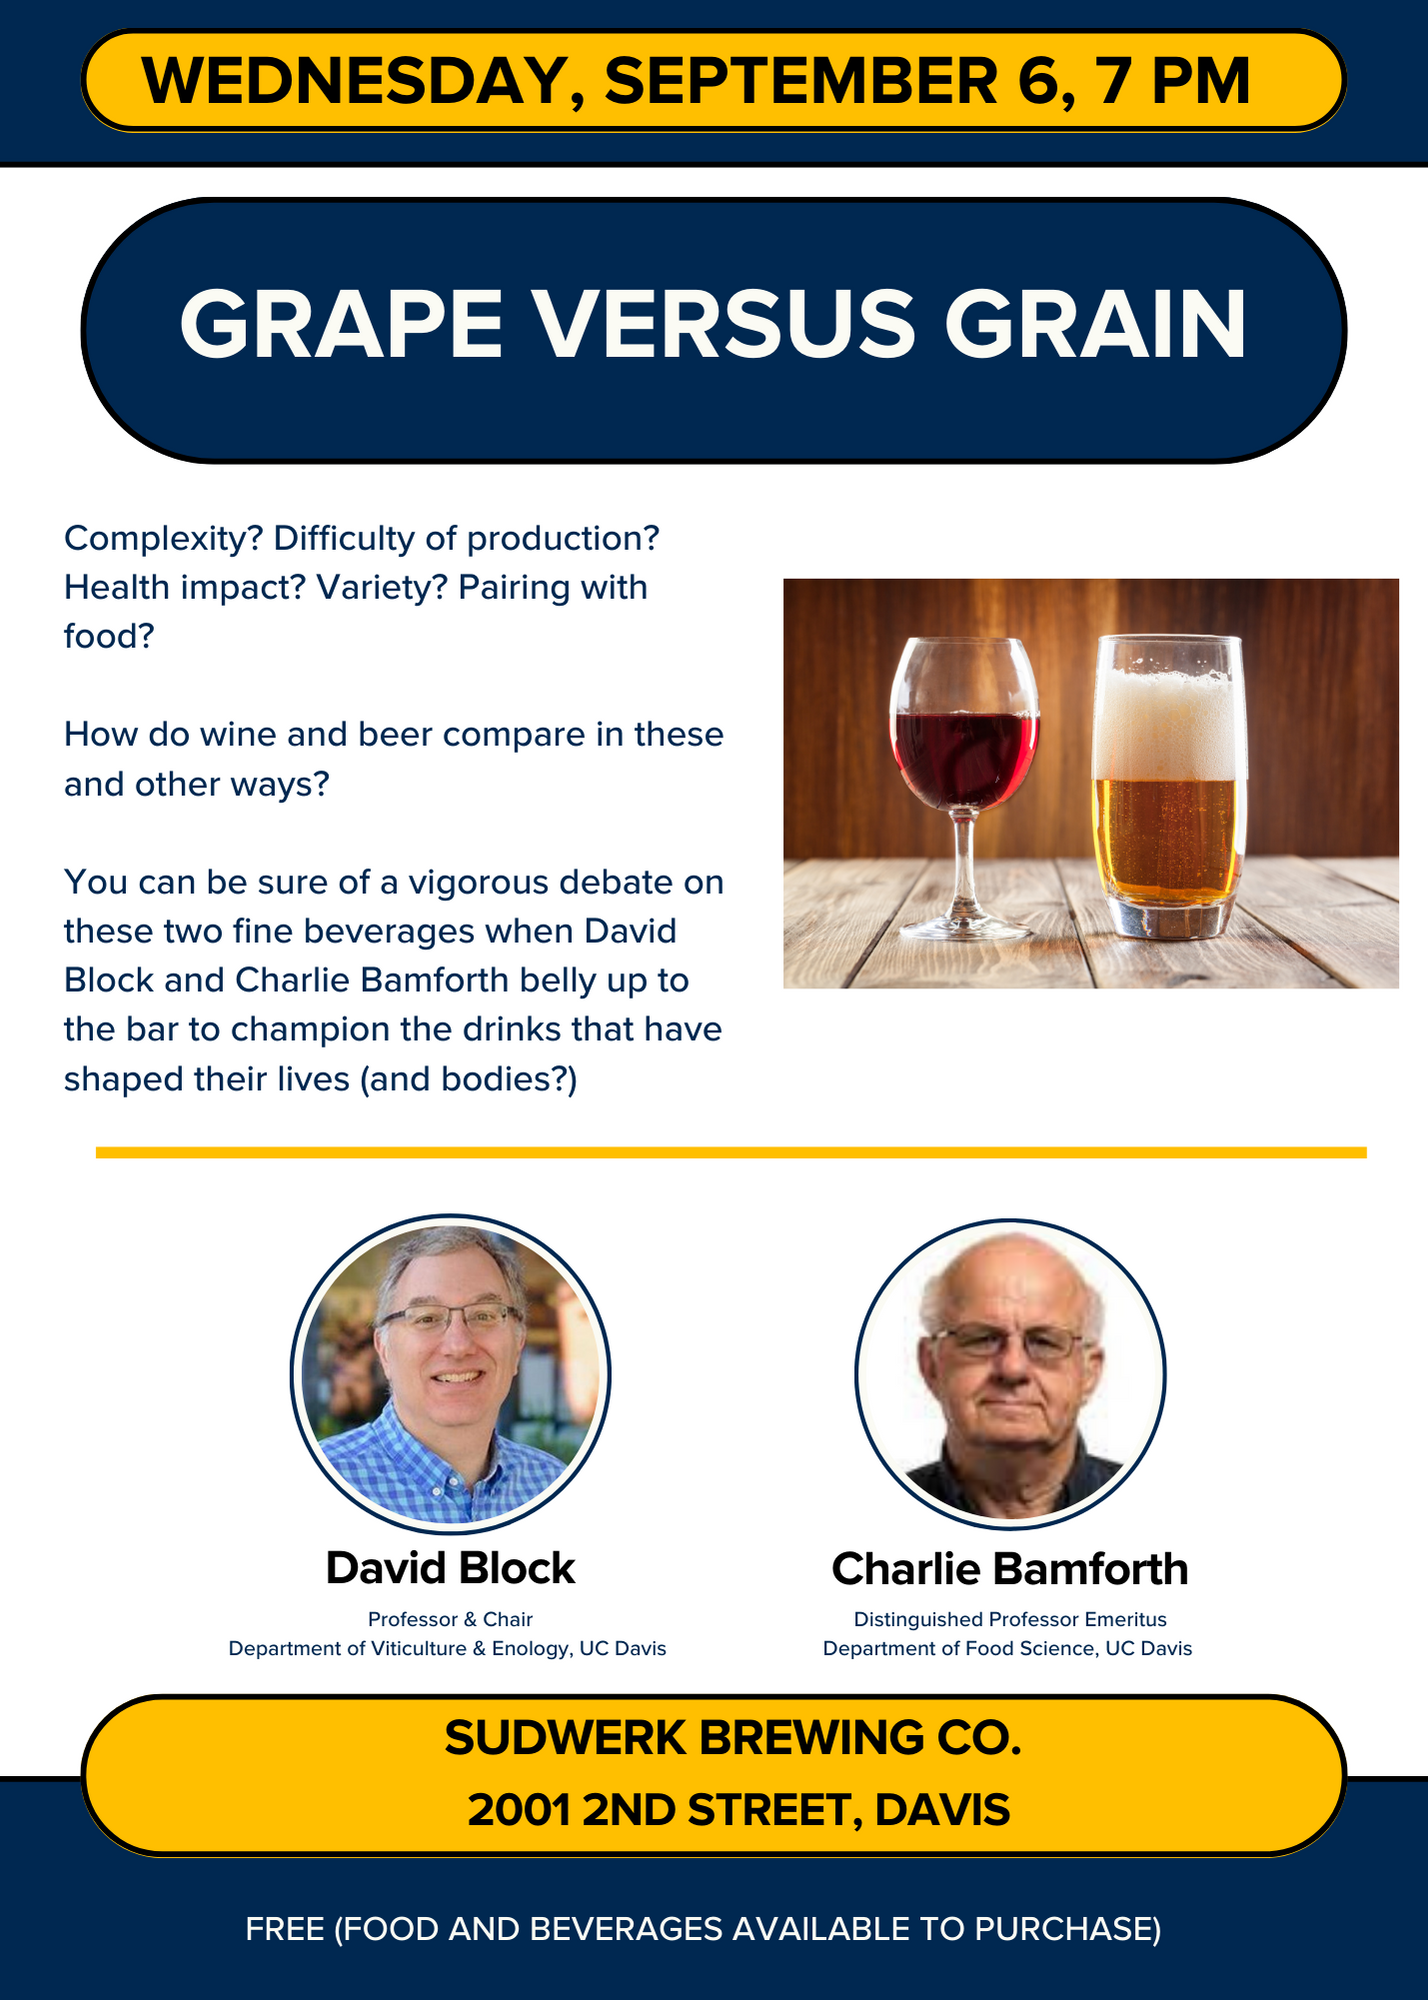 Grape vs Grain event flyer with text and images of wine, beer, and the two speakers